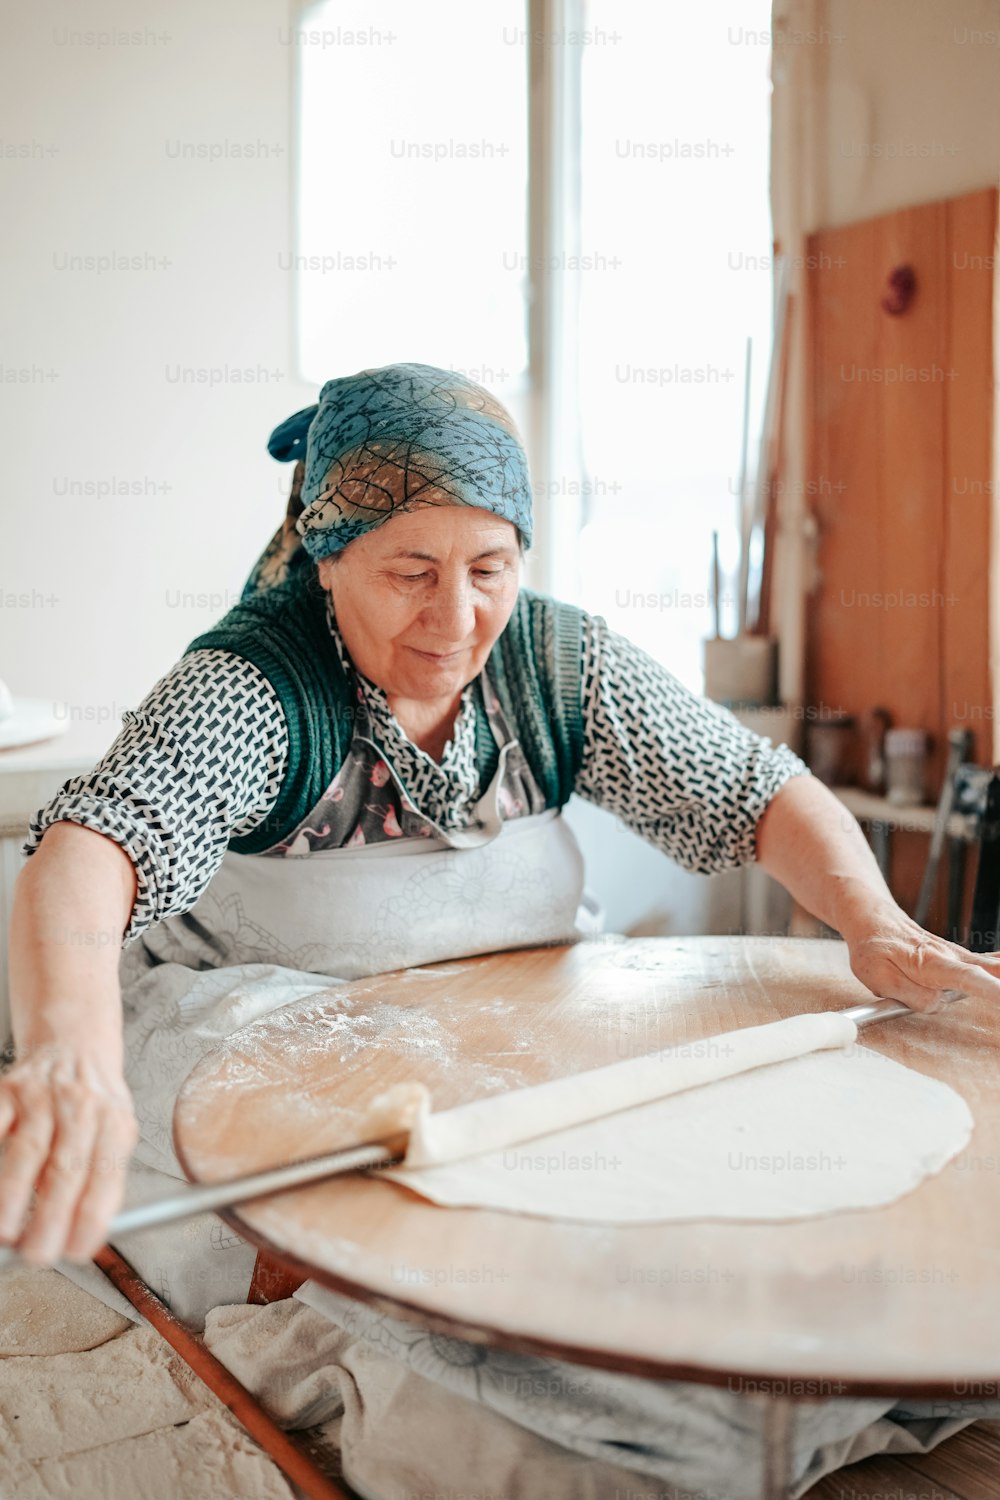 a woman is making bread on a table